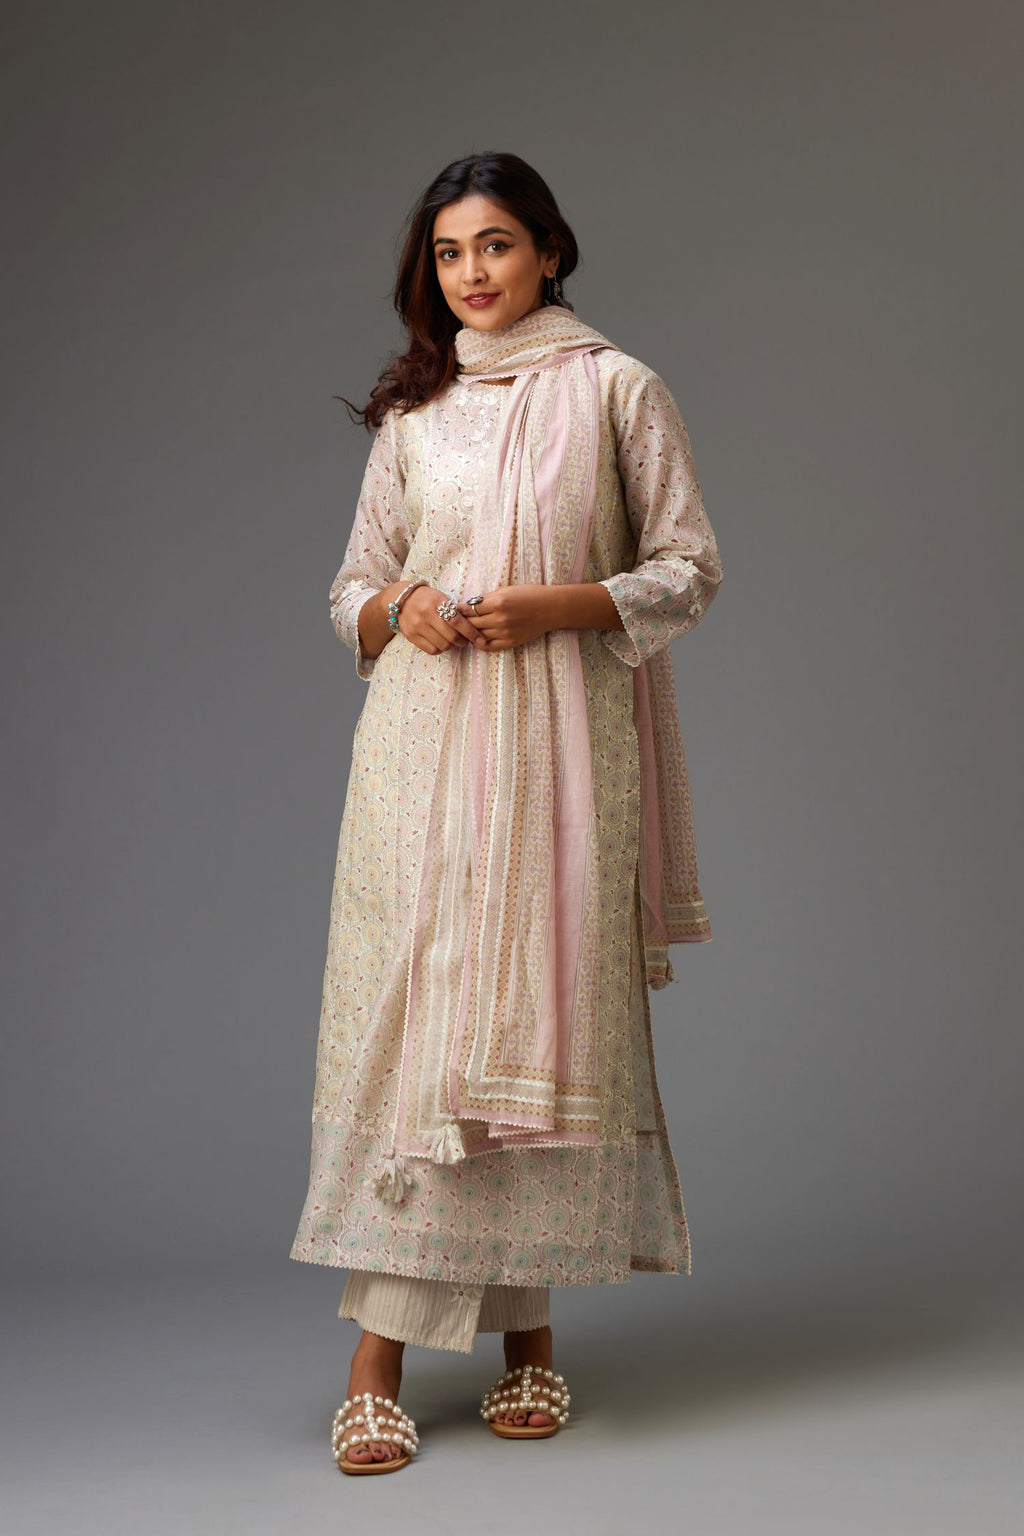 Silk Chanderi hand-block printed kurta set with multi-print panels, highlighted with white thread embroidery and chiffon flowers.